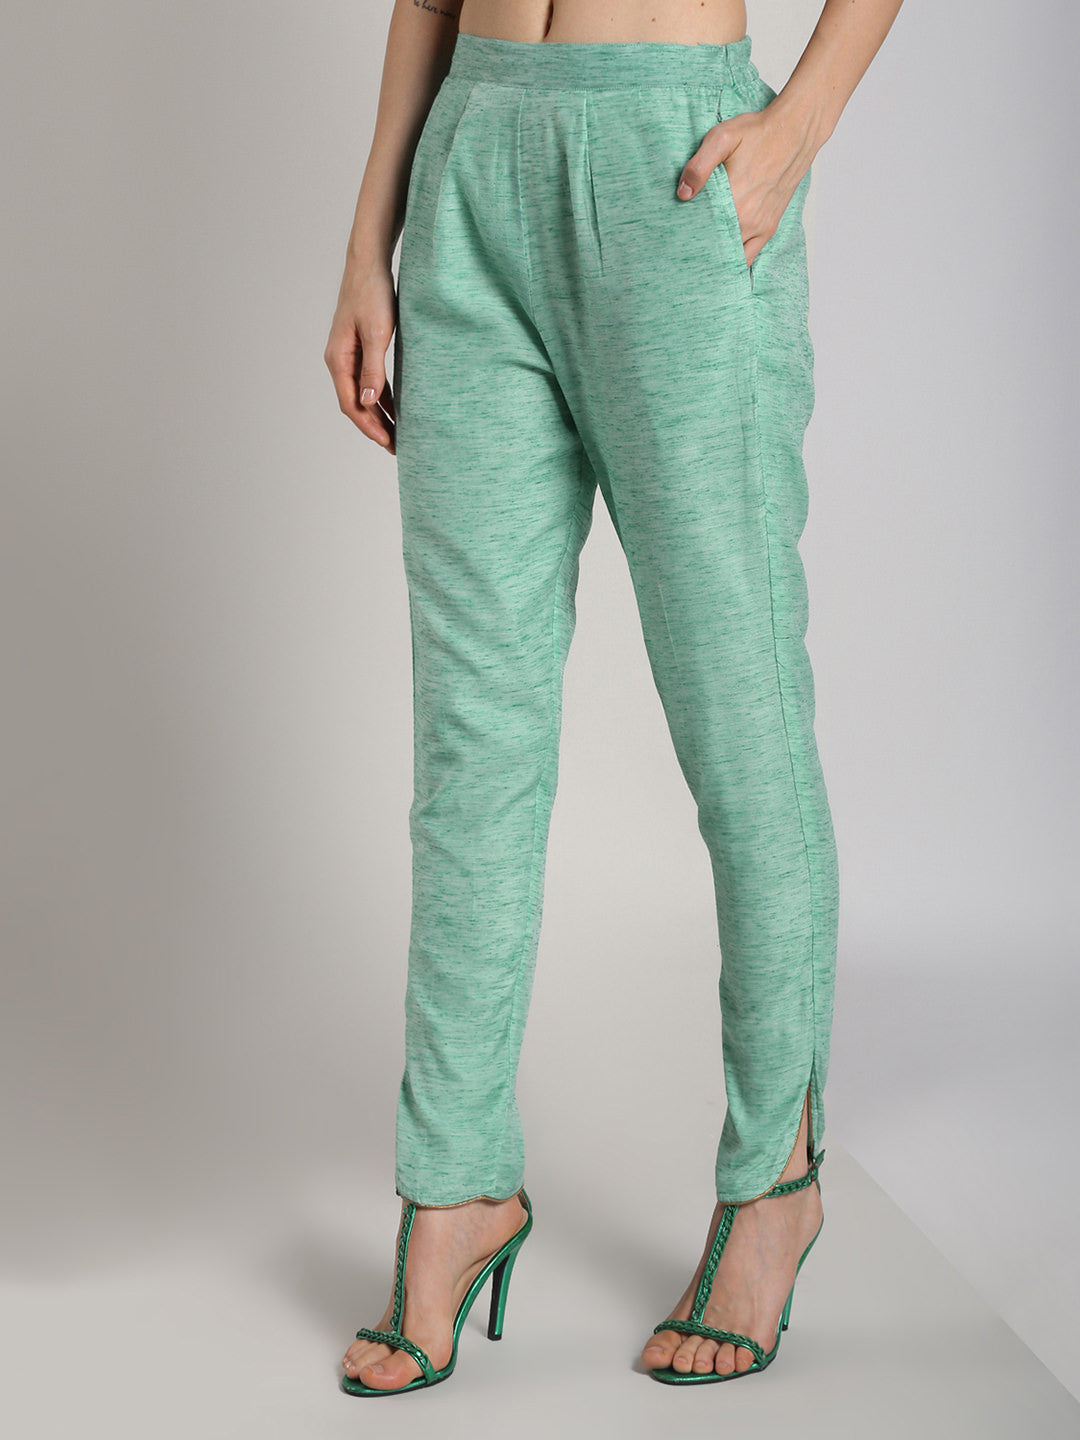 Abhishti Textured Baswada Pants with Curved Hem and piping